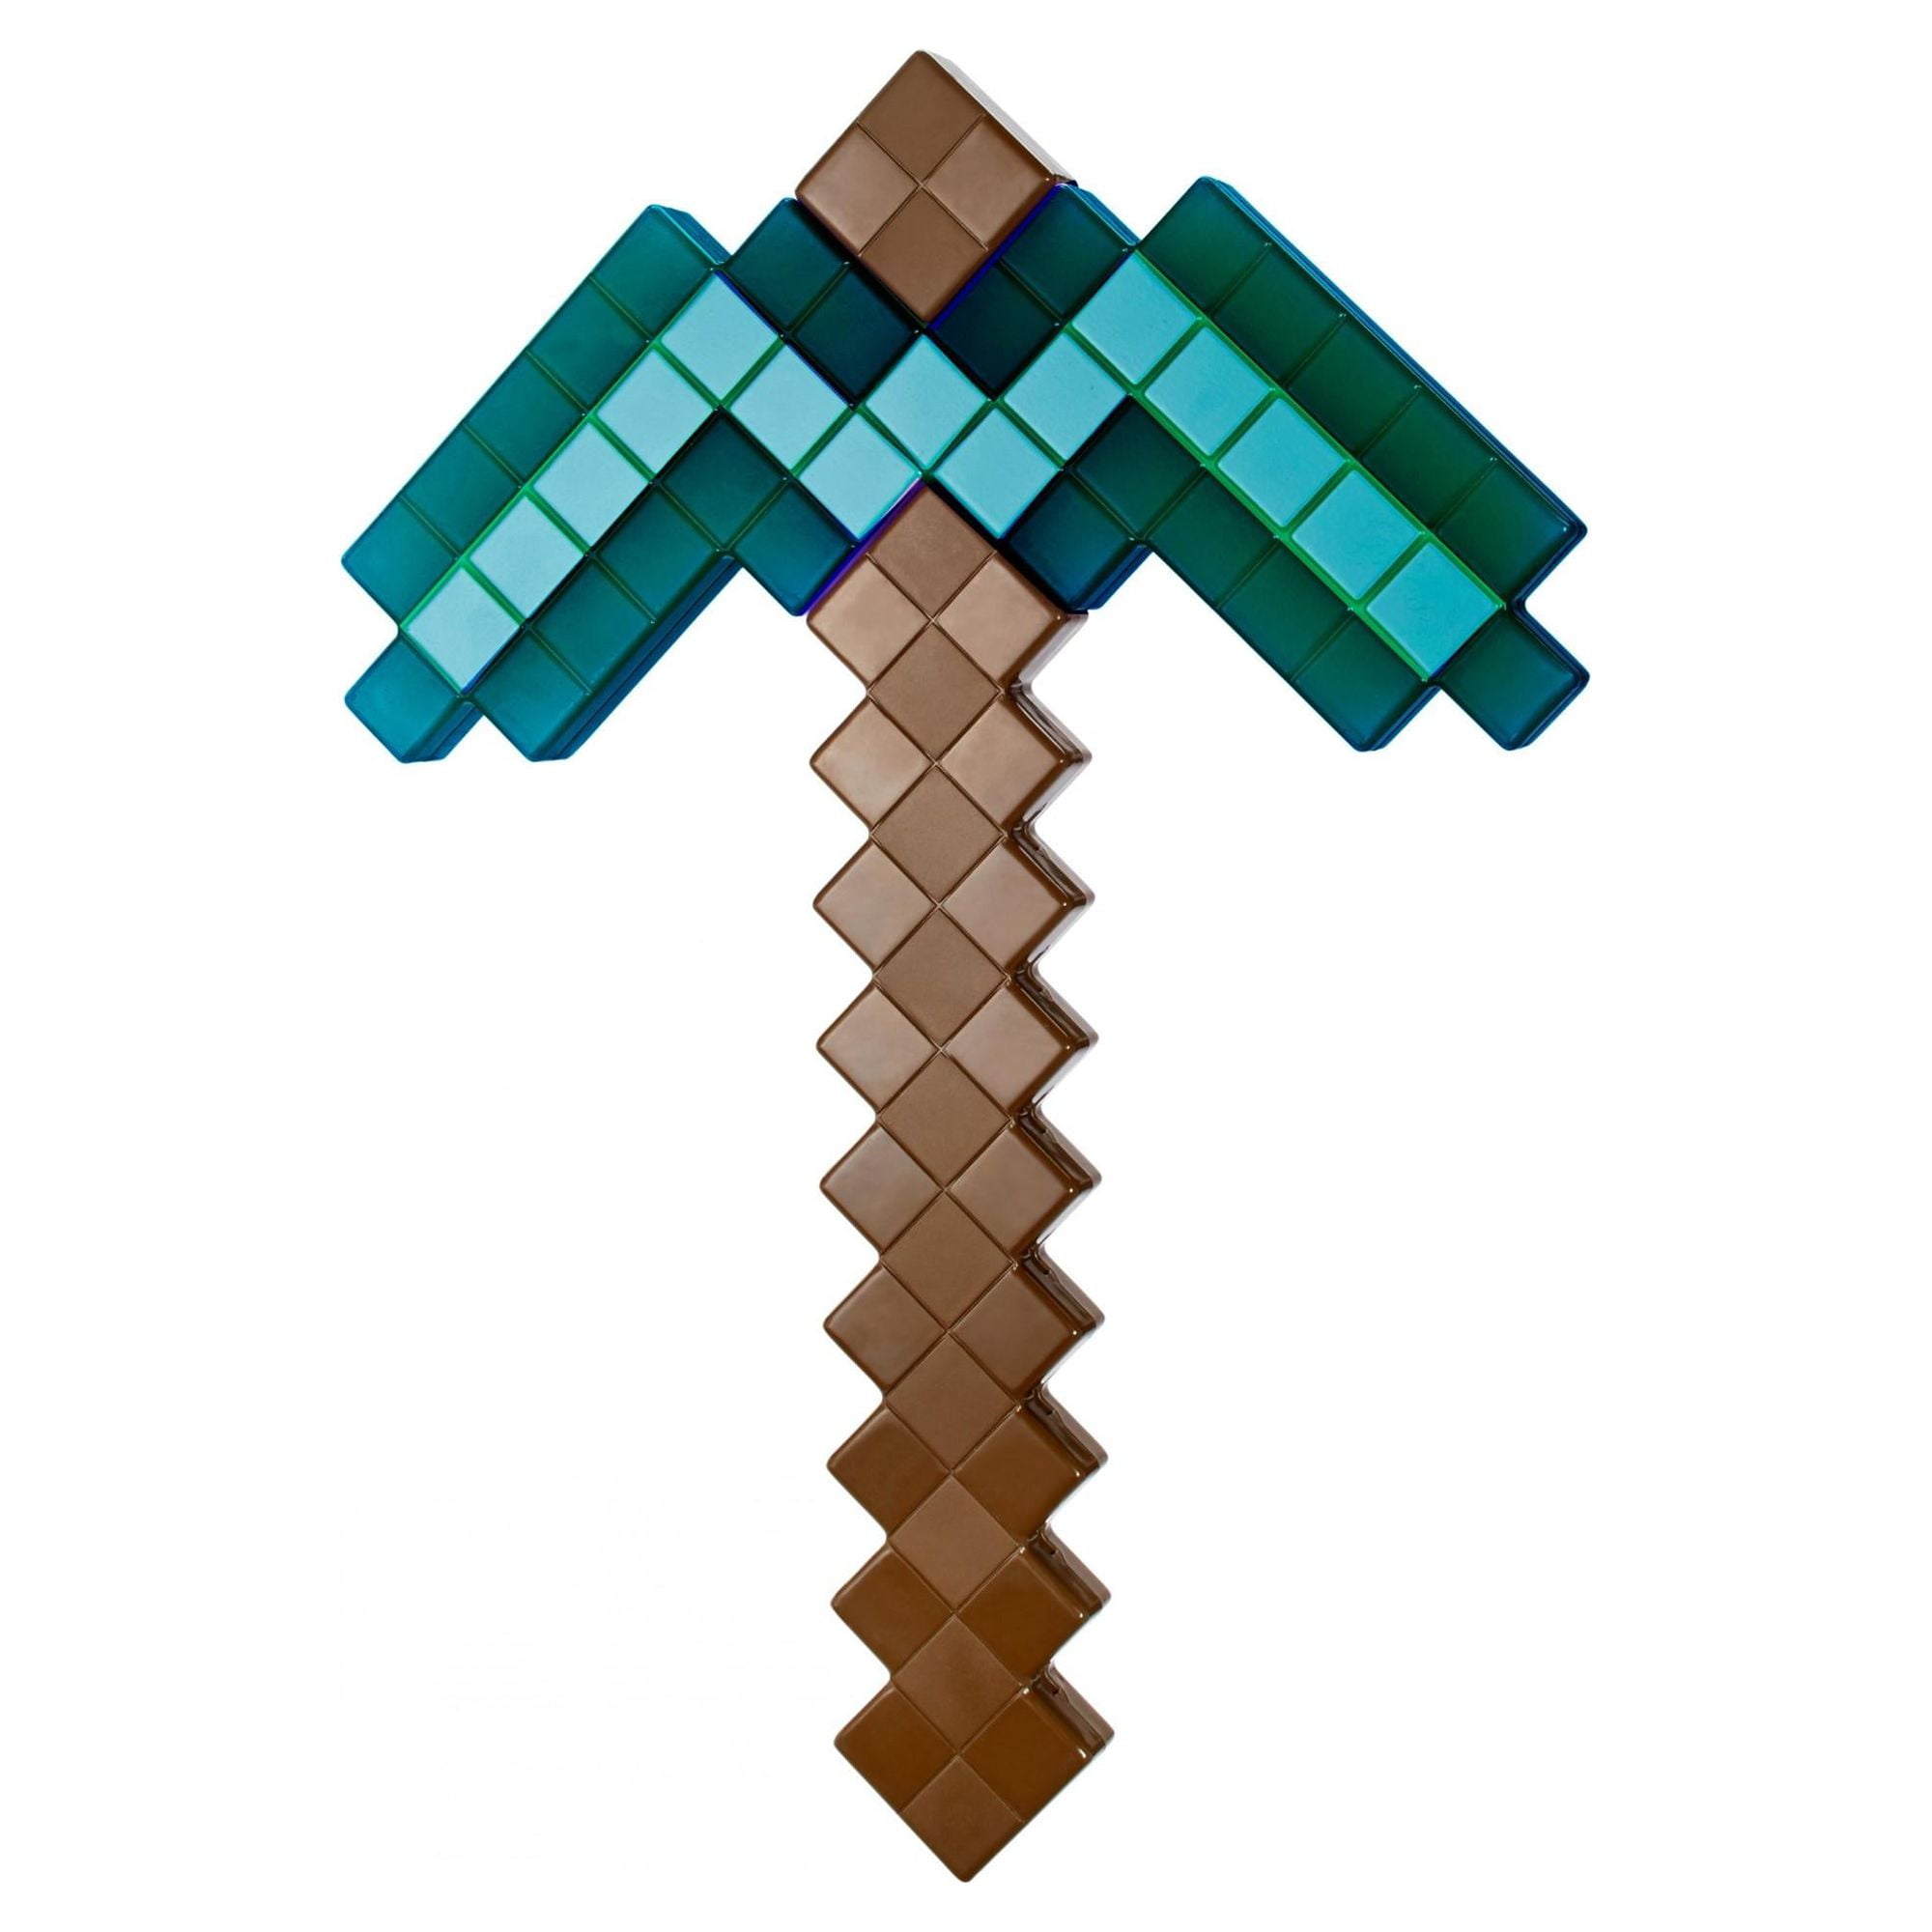 My low swords texture pack : r/Minecraft